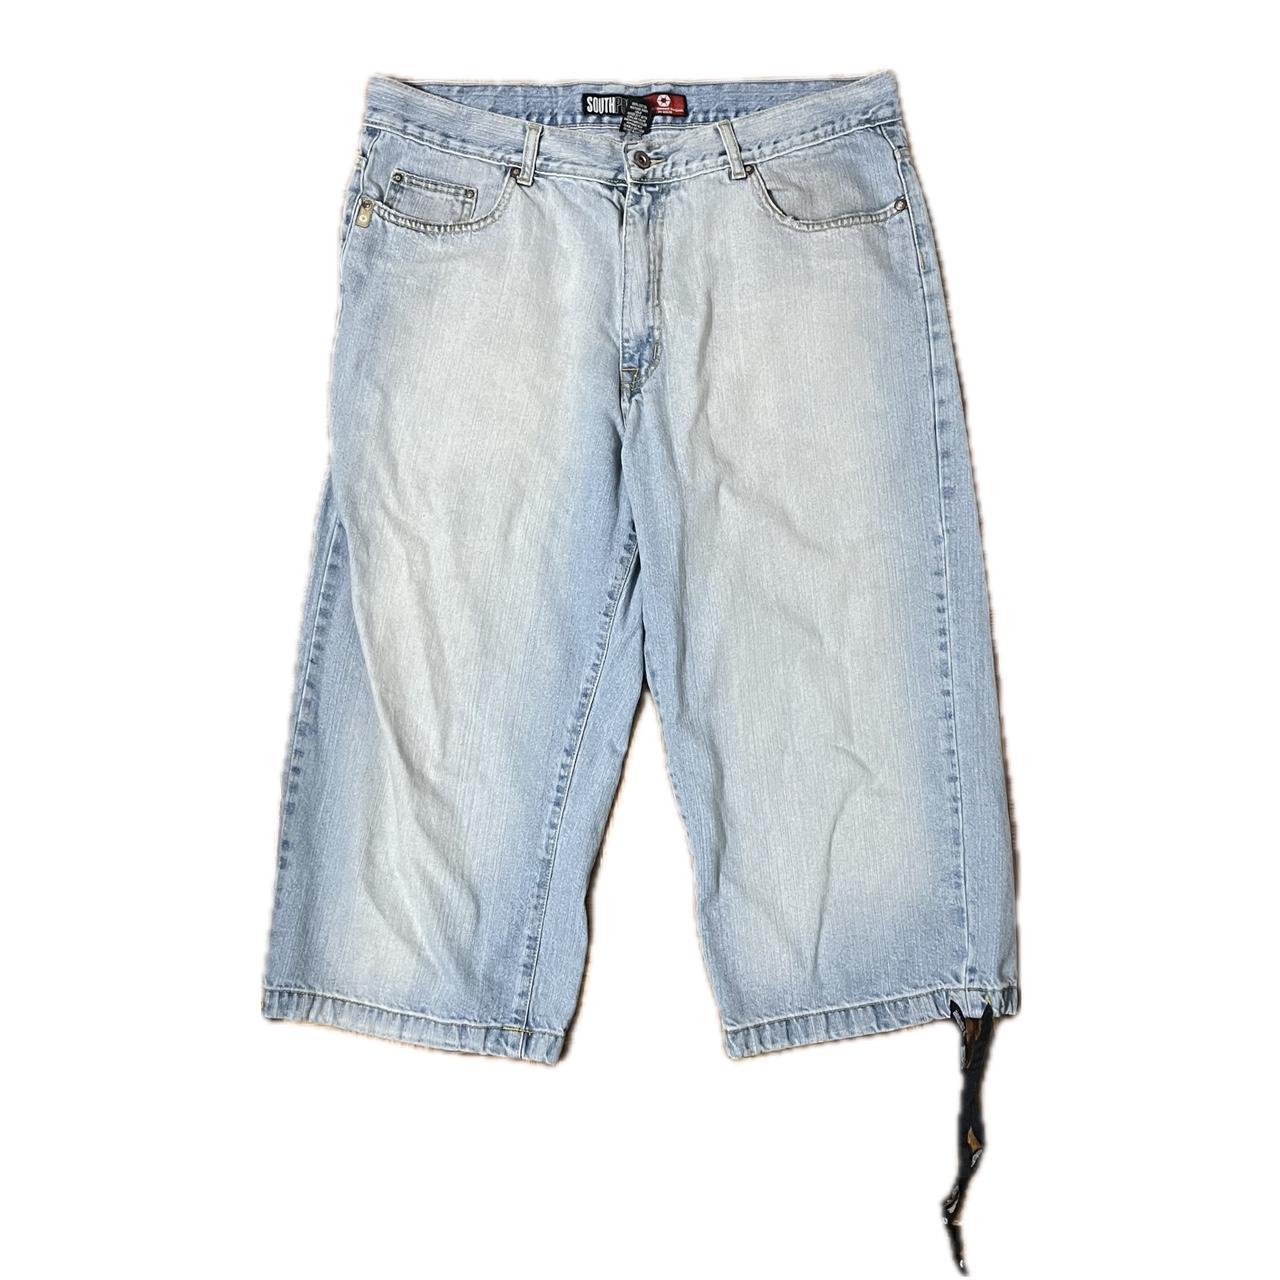 southpole jorts i cant tell if theyre jorts or... - Depop